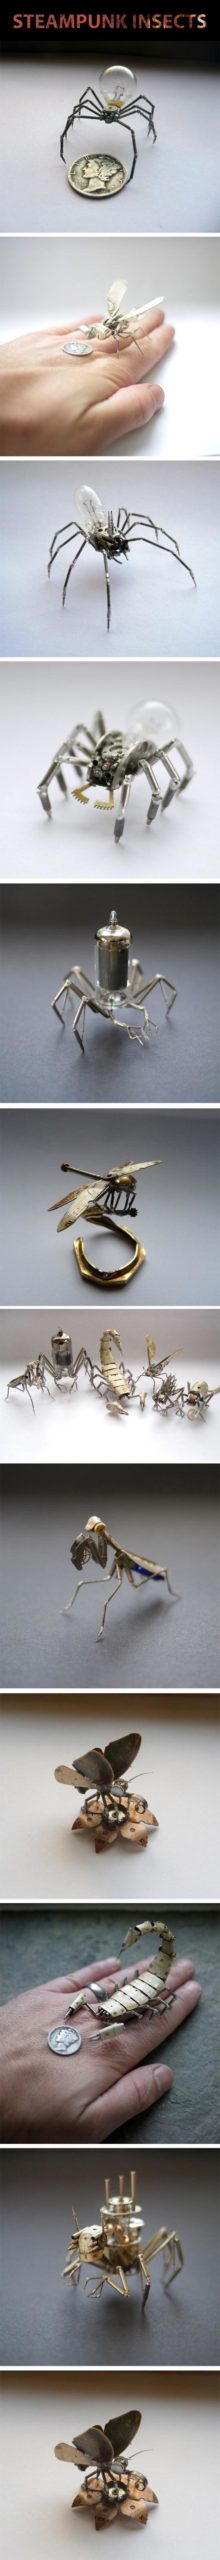 Steampunk+insects